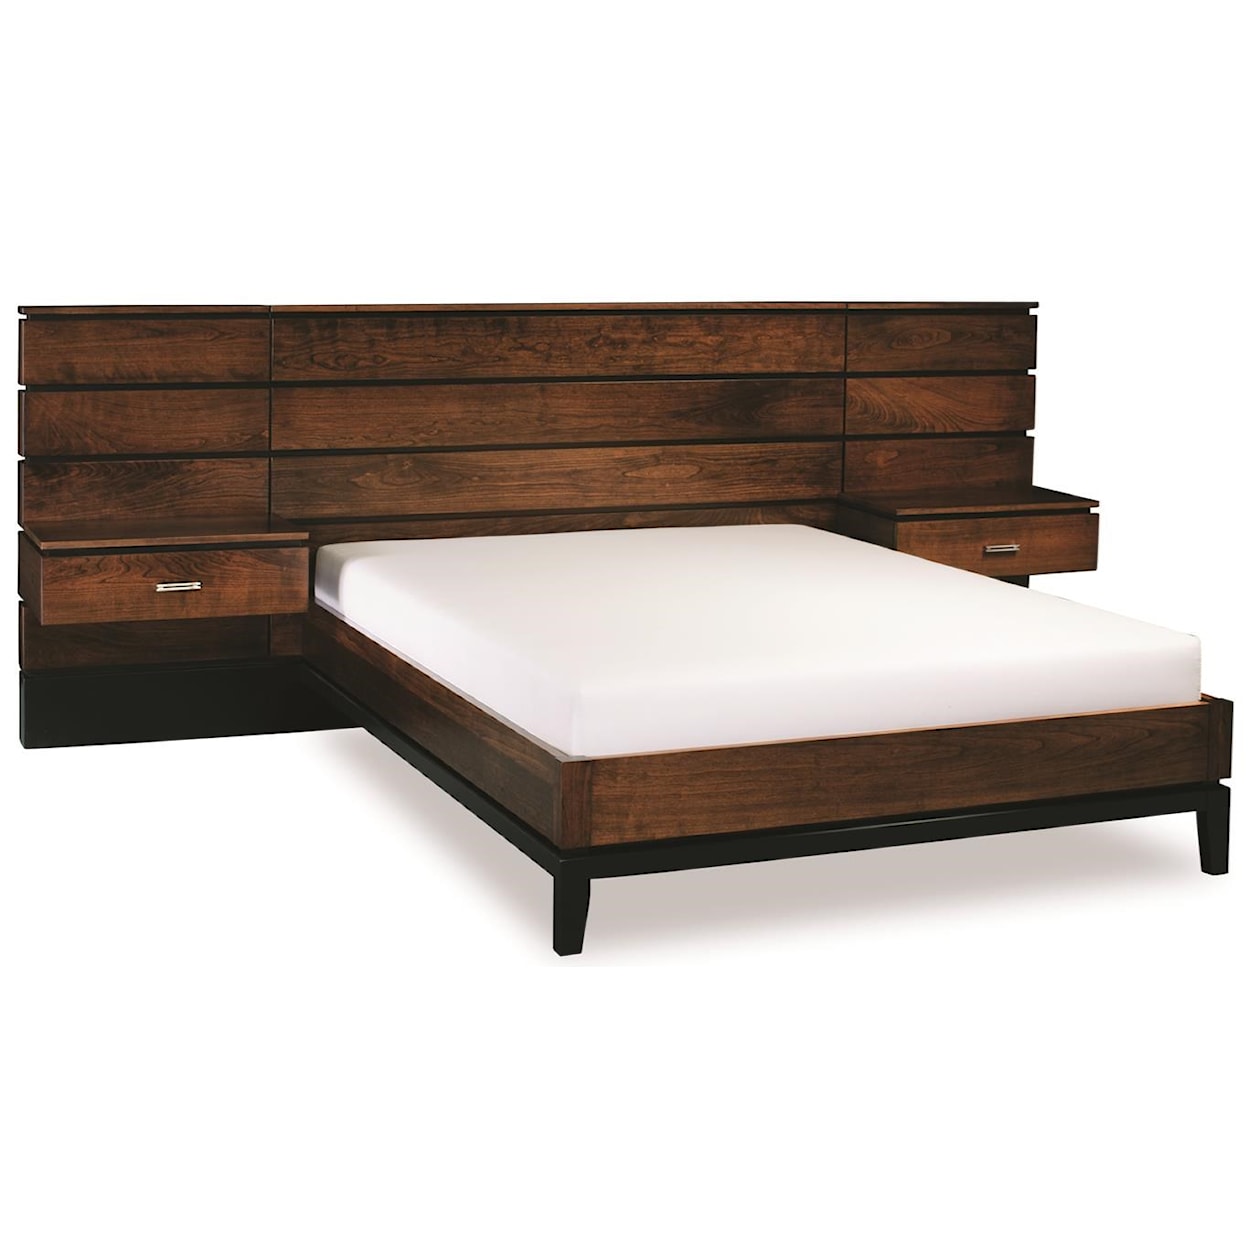 Simply Amish Frisco King Panel Bed with Attached Nightstands